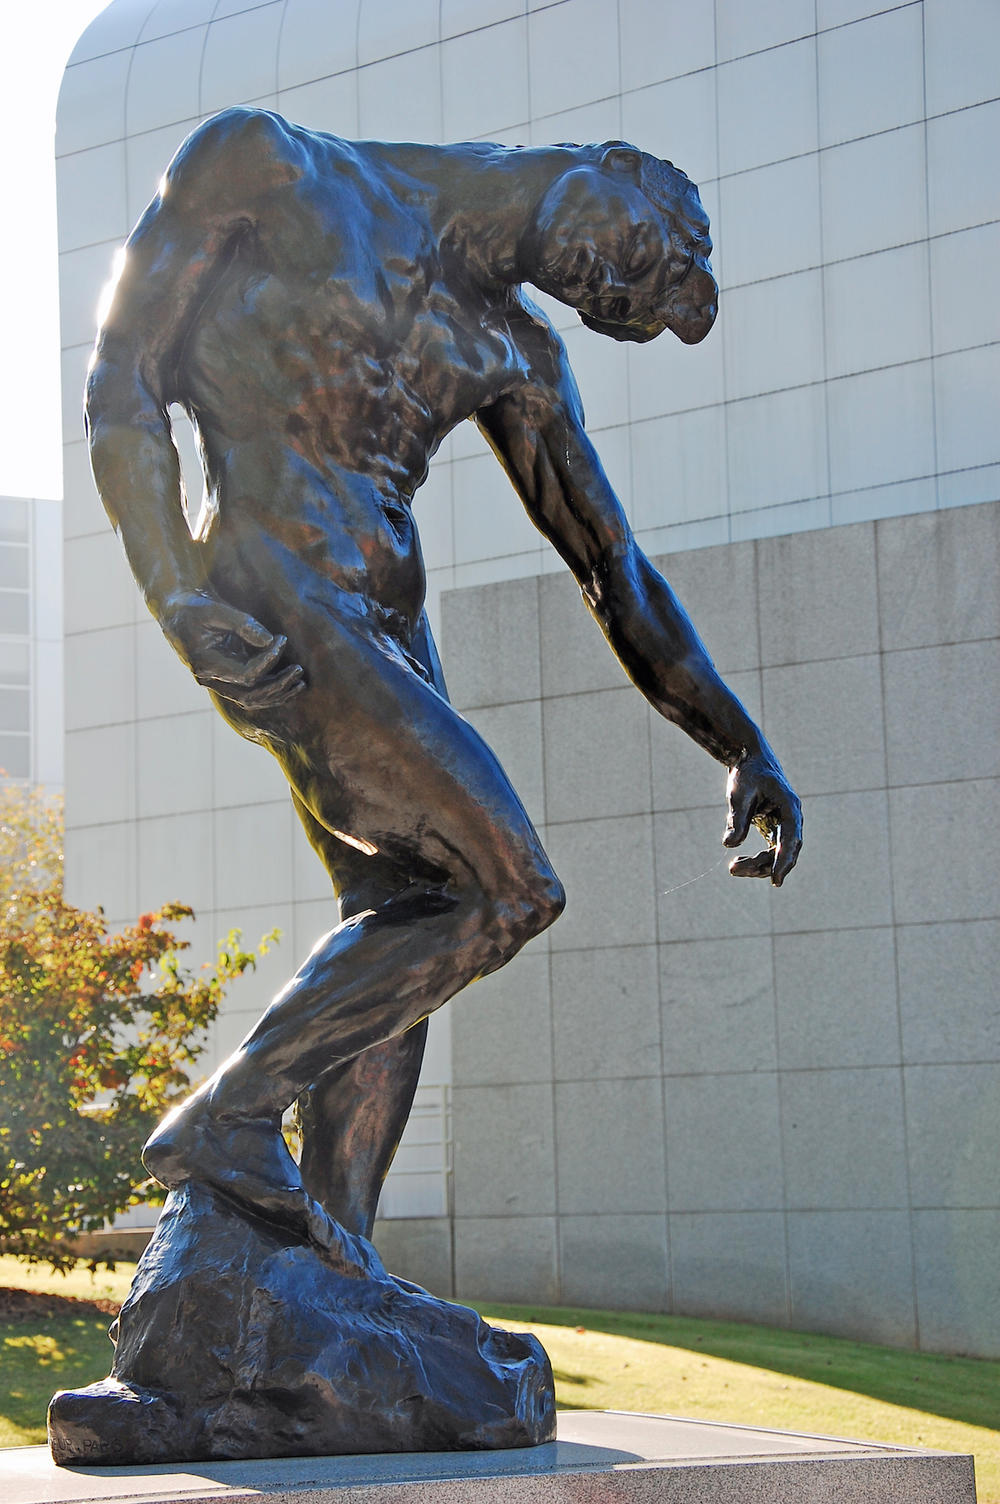 "The Shade" by Rodin at the High Museum of Art, Atlanta. Donated to the City of Atlanta by the French government in memory of the Orly air disaster victims.